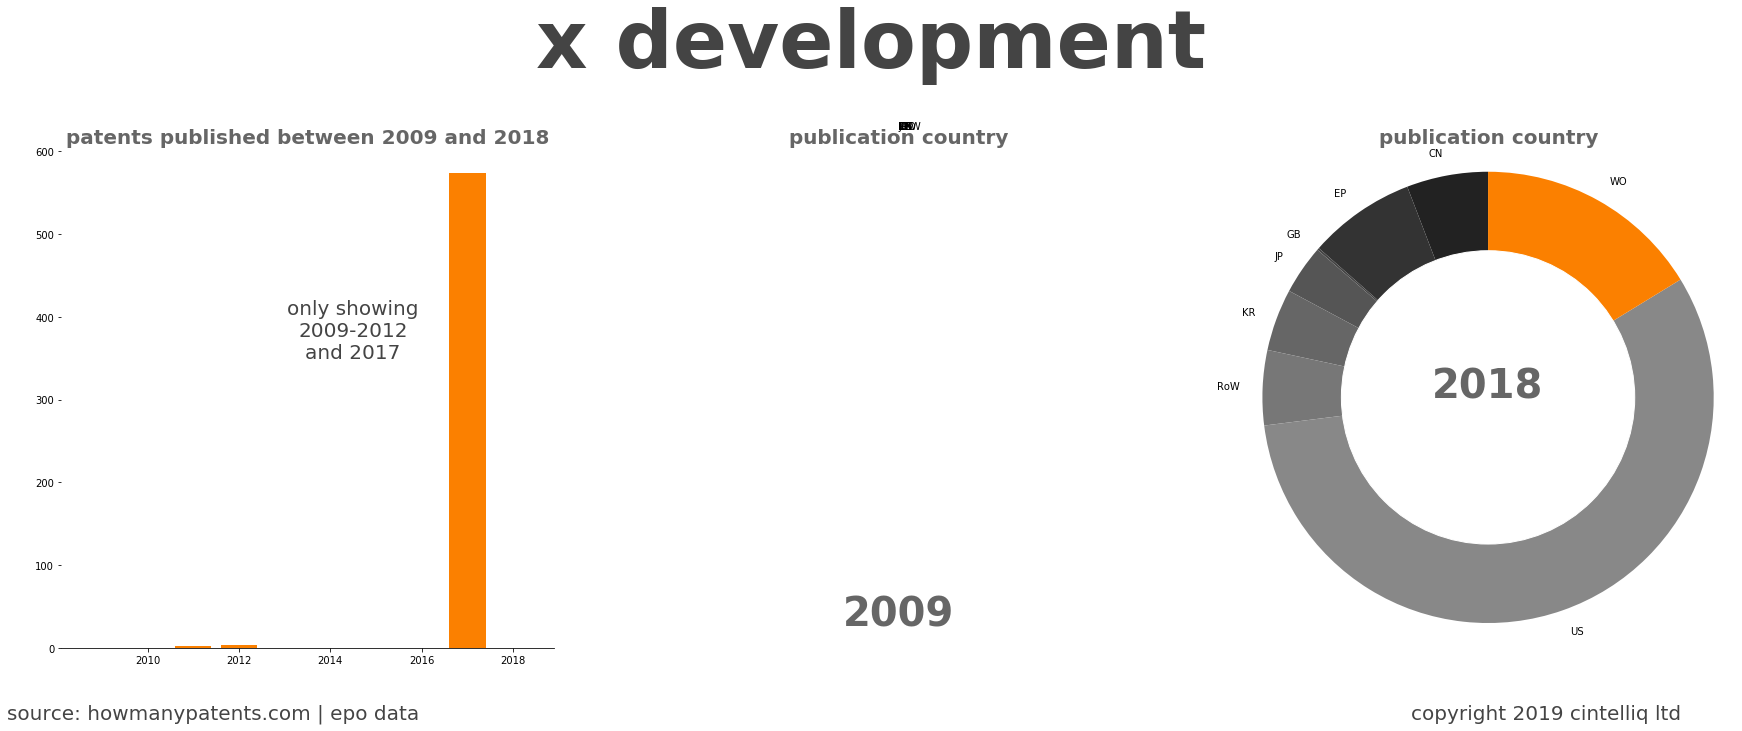 summary of patents for X Development